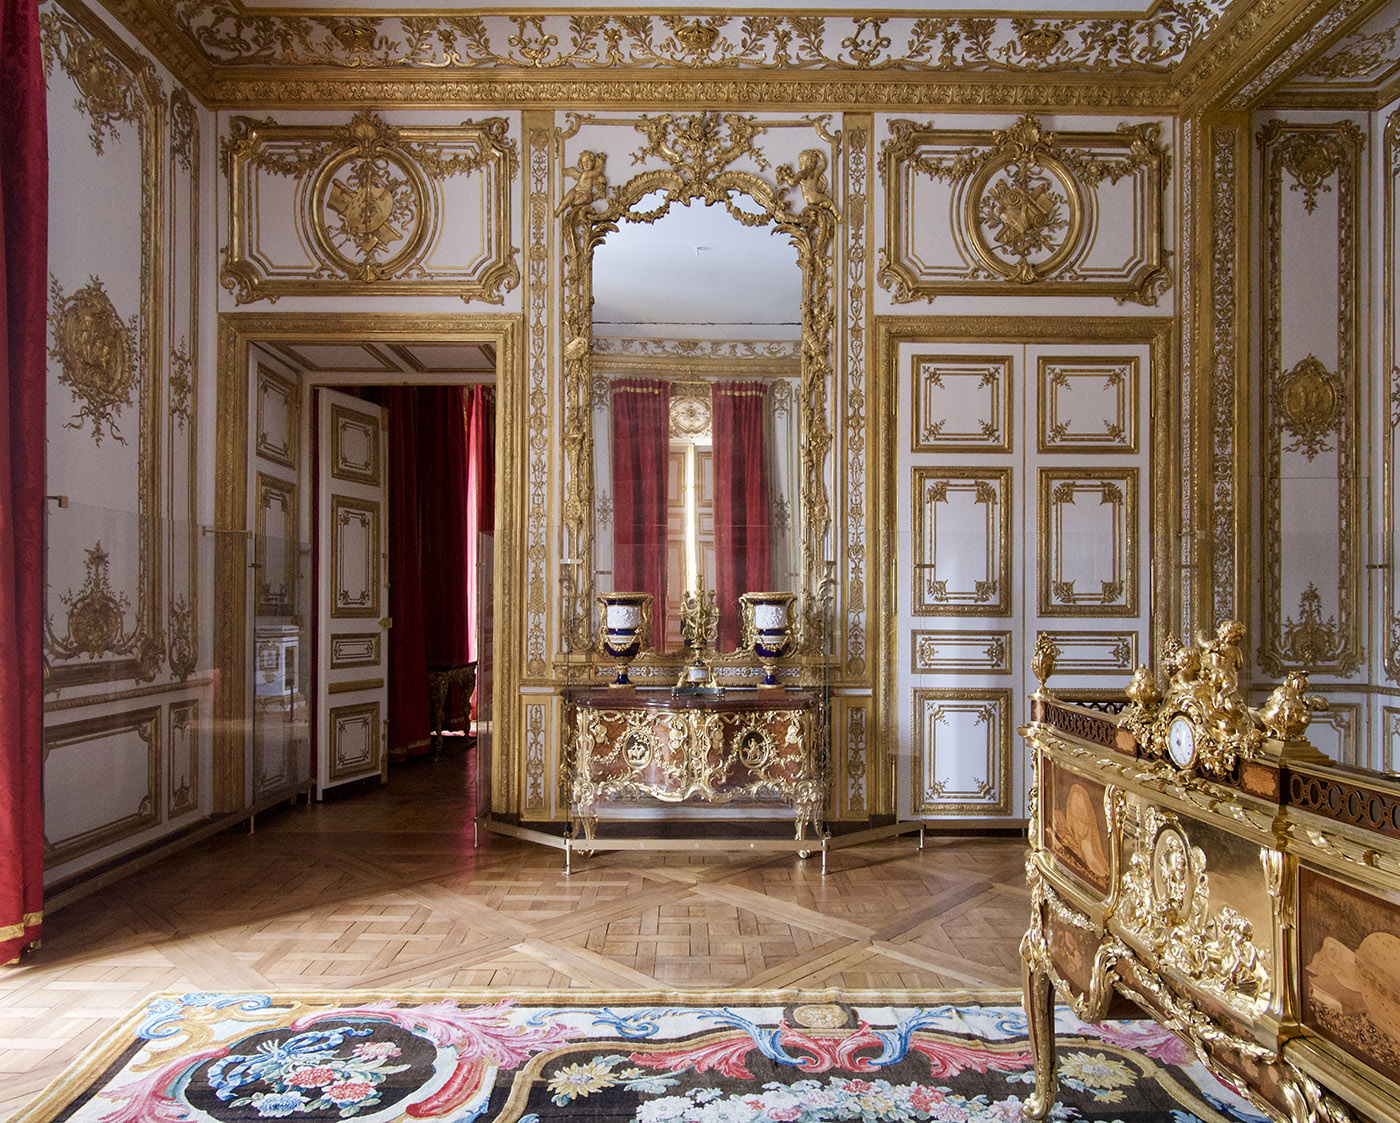 At the Versailles palace, the rebirth of the King's corner cabinet